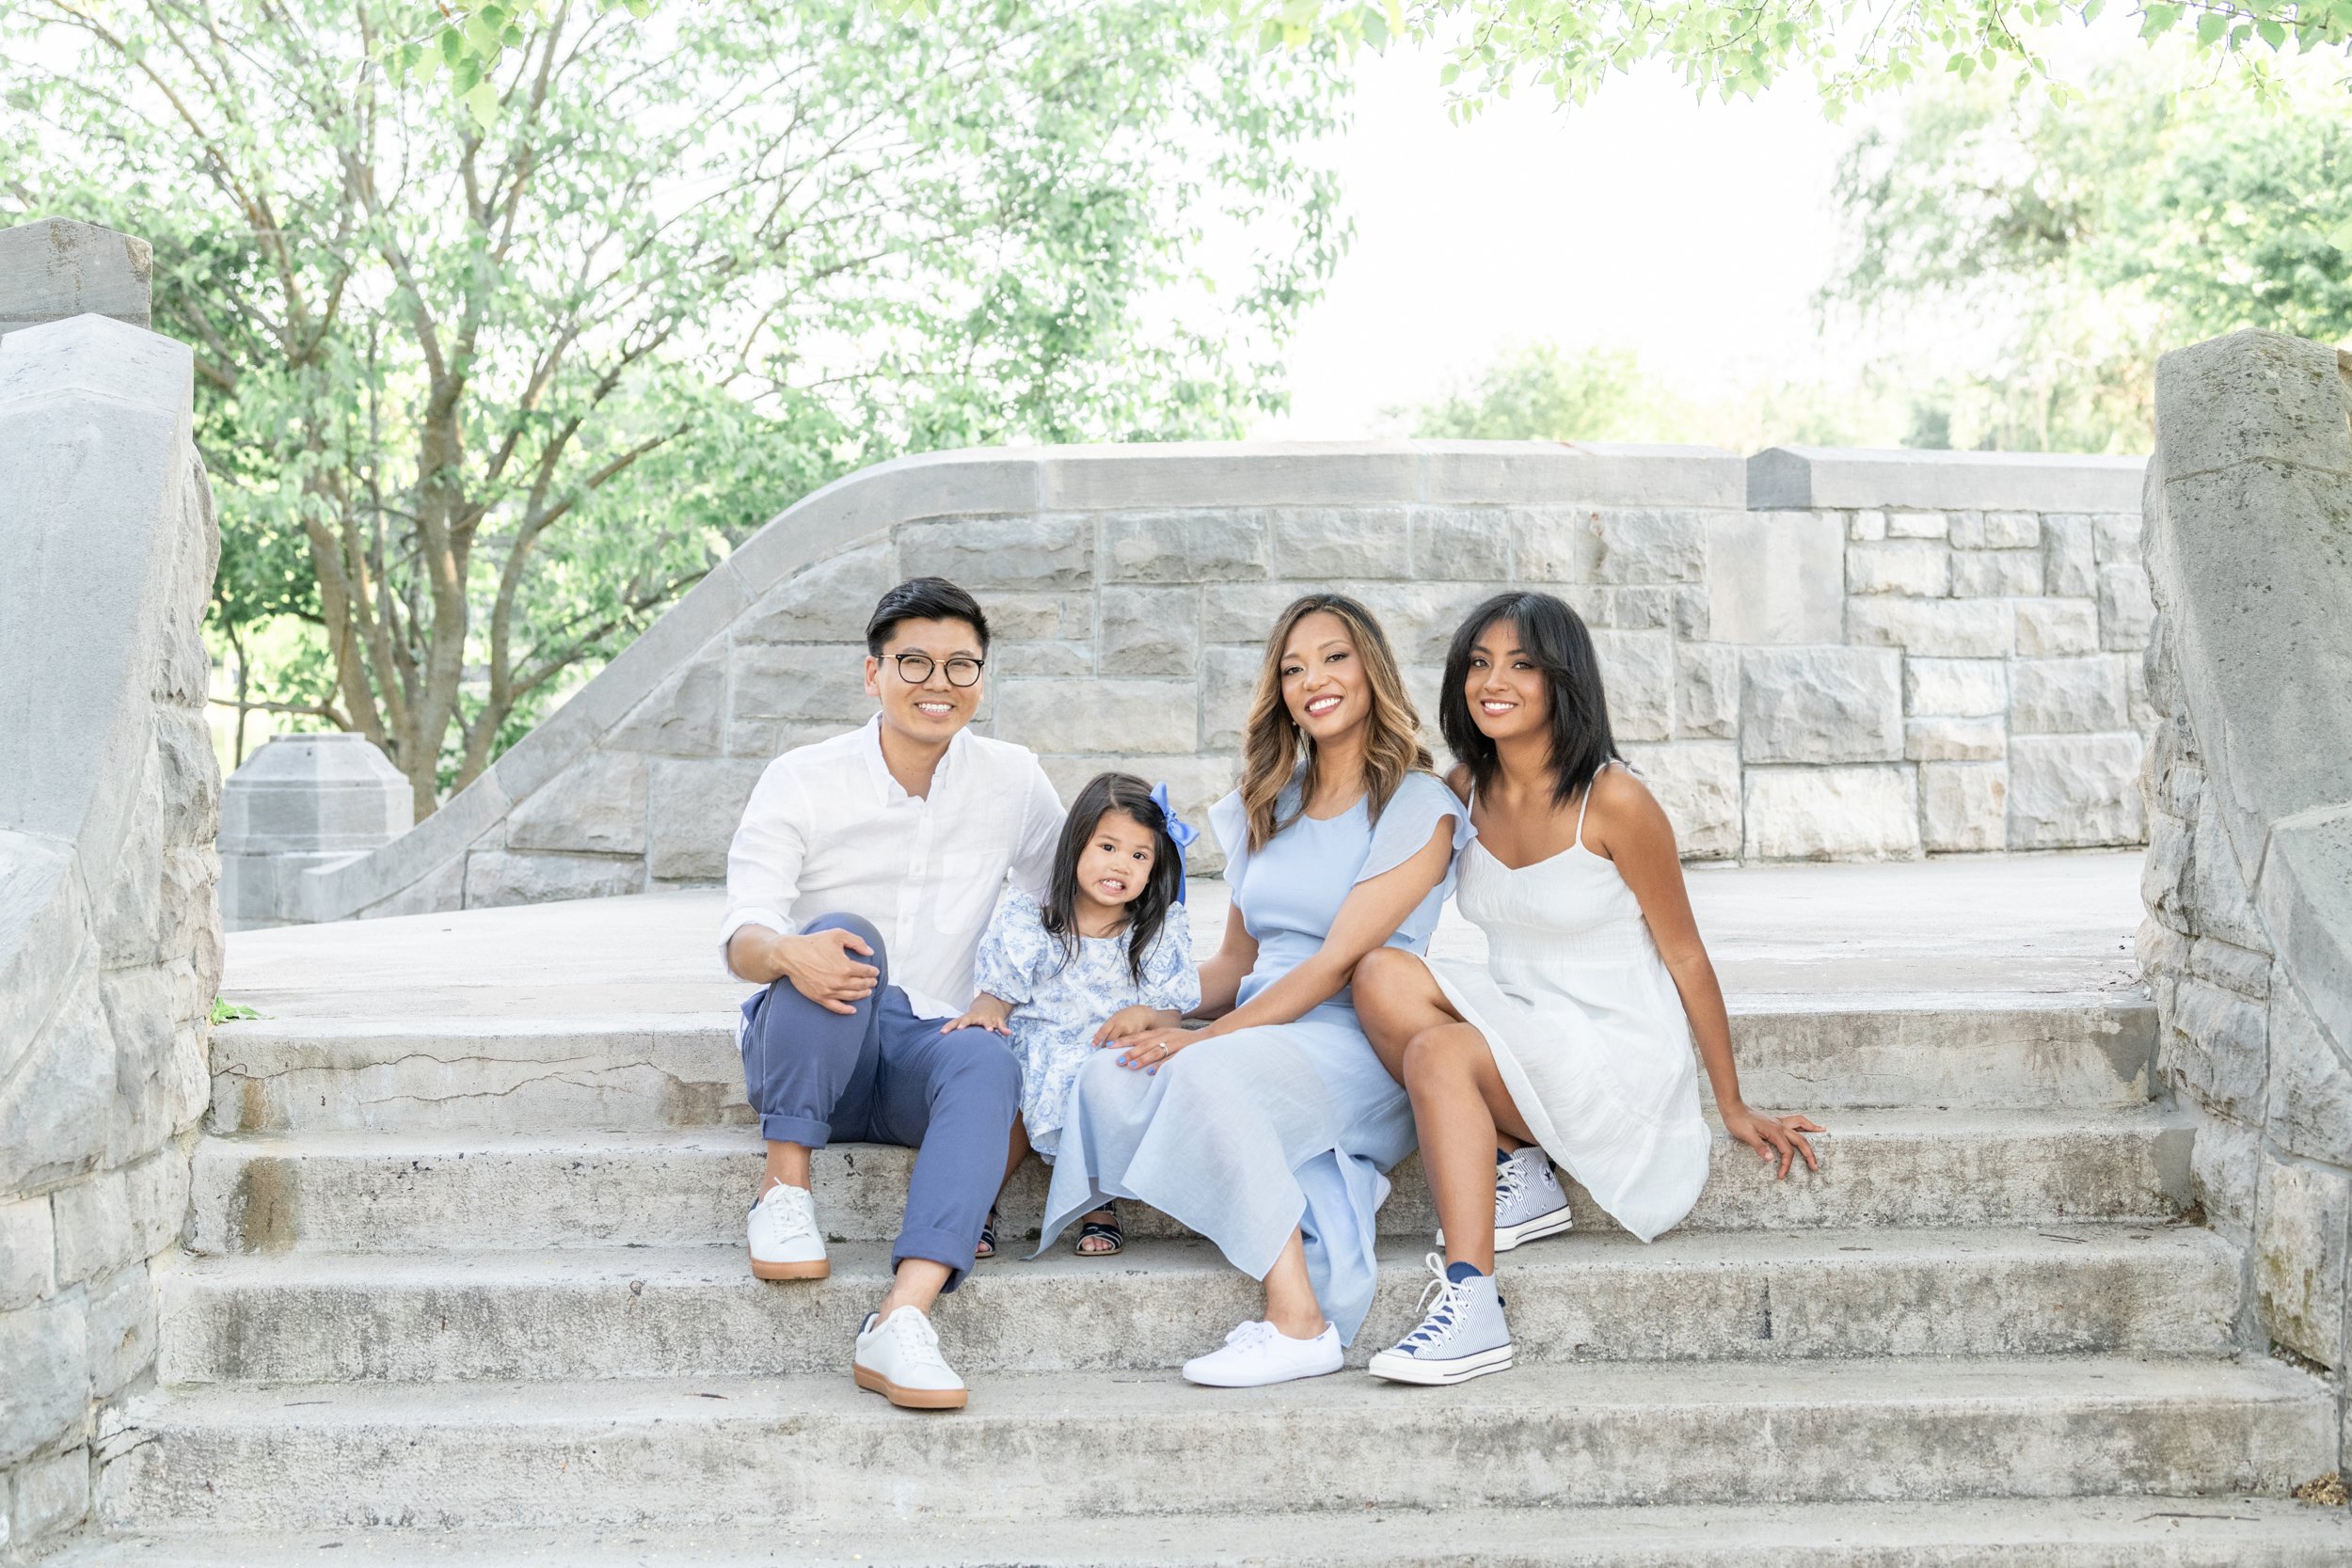  Semi formal family portraits in the park with Nicole Hawkins Photography in New Jersey #seniorportraits #familyportraits #veronanj #westfieldnj #nicolehawkinsphotography #newjerseyphotographer  #portraitphotography #heirloomphotography 